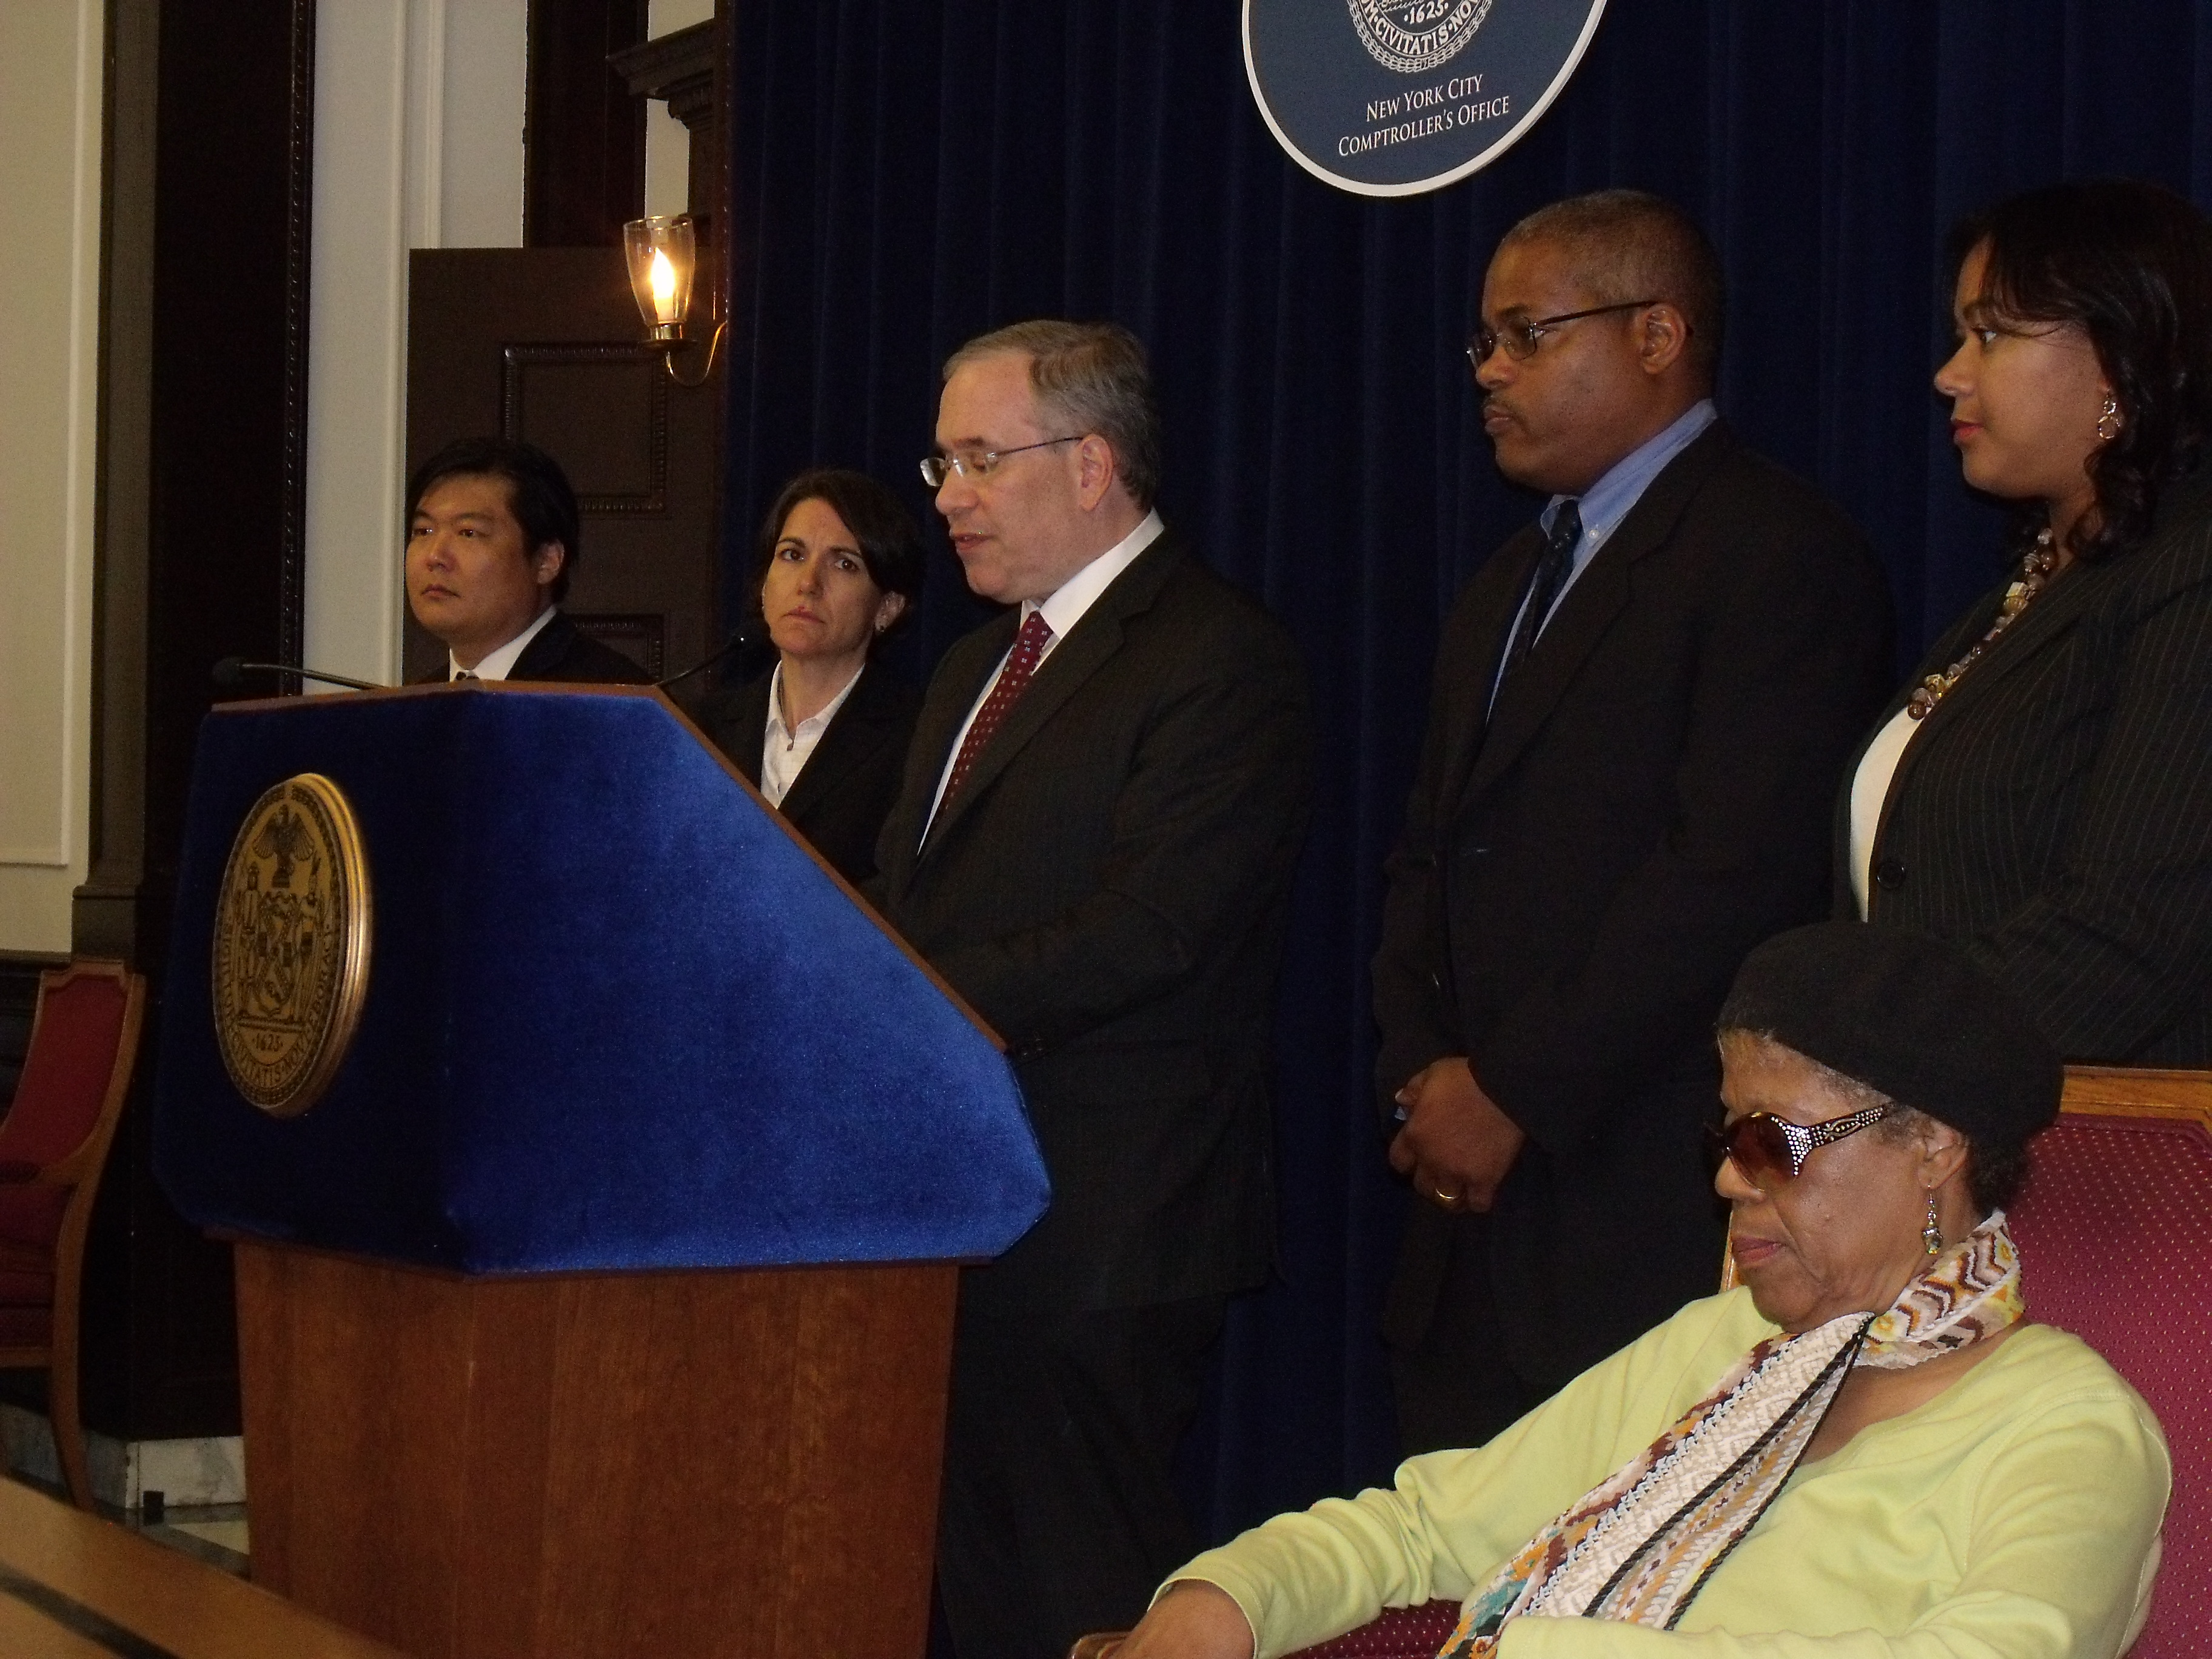 Comptroller Scott Stringer announced a settlement in the death of Jerome Murdough, whose mother Alma is seated at the far right. (Photo: Jillian Jorgensen)